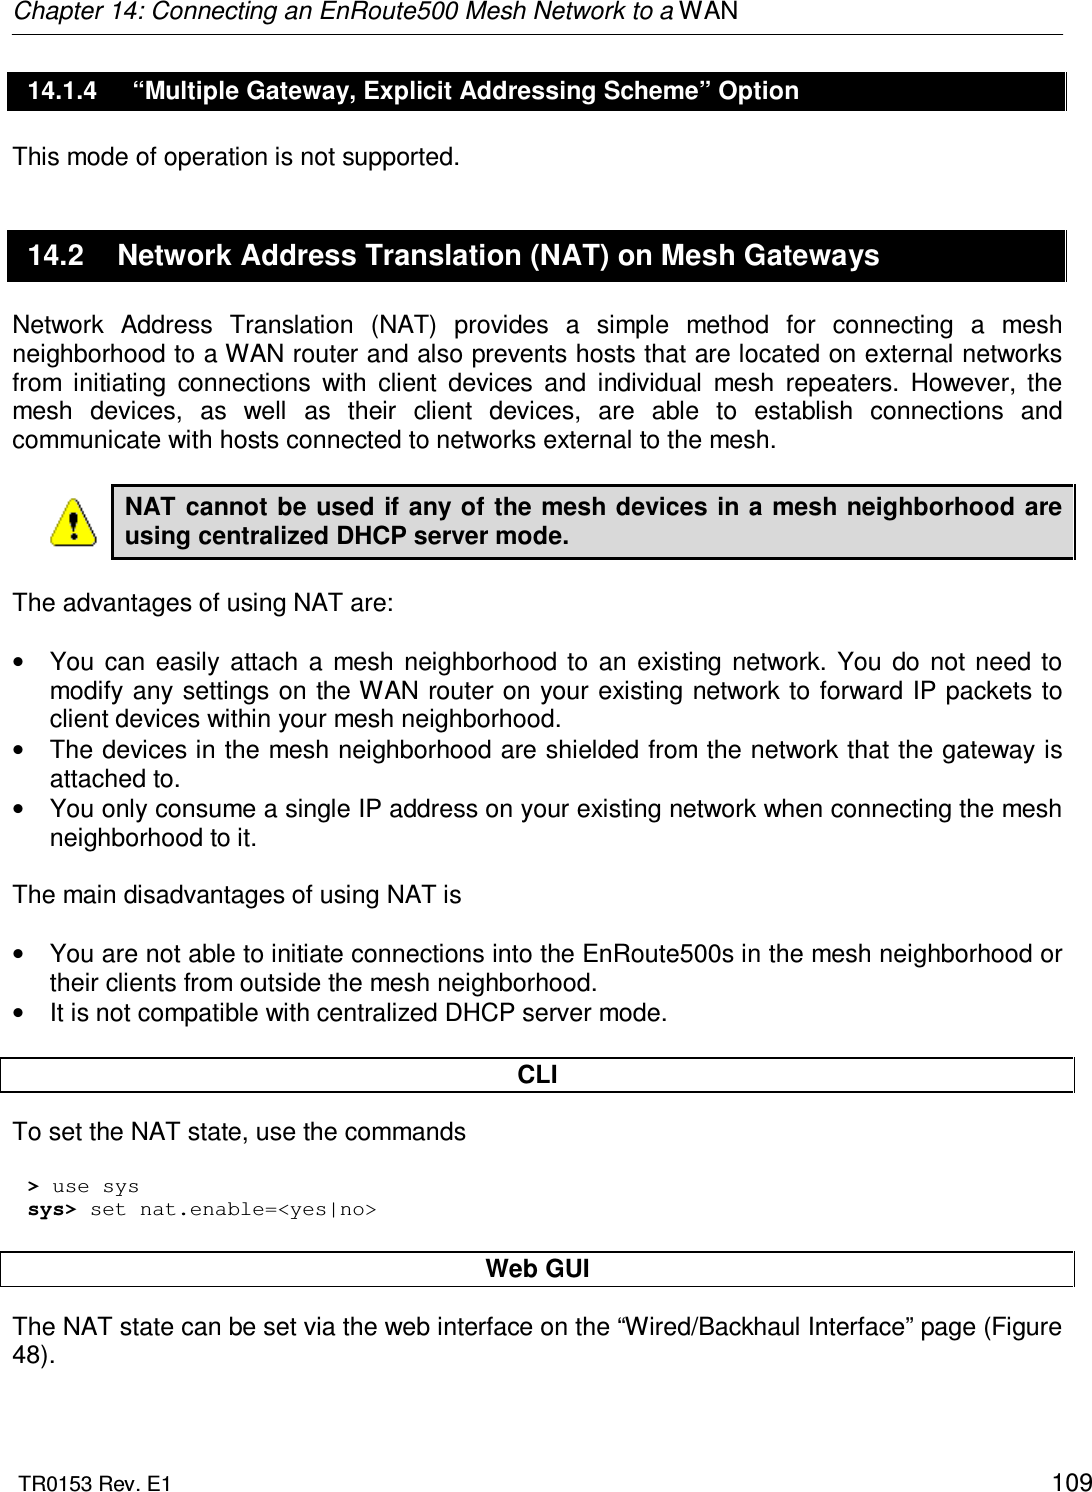 Chapter 14: Connecting an EnRoute500 Mesh Network to a WAN  TR0153 Rev. E1    109 14.1.4  “Multiple Gateway, Explicit Addressing Scheme” Option This mode of operation is not supported. 14.2  Network Address Translation (NAT) on Mesh Gateways Network  Address  Translation  (NAT)  provides  a  simple  method  for  connecting  a  mesh neighborhood to a WAN router and also prevents hosts that are located on external networks from  initiating  connections  with  client  devices  and  individual  mesh  repeaters.  However,  the mesh  devices,  as  well  as  their  client  devices,  are  able  to  establish  connections  and communicate with hosts connected to networks external to the mesh.  NAT cannot be used if any of the mesh devices in a mesh neighborhood are using centralized DHCP server mode.  The advantages of using NAT are:  •  You  can  easily  attach  a  mesh  neighborhood  to  an  existing  network.  You  do  not need to modify any settings on the WAN router on your existing network to forward IP packets to client devices within your mesh neighborhood. •  The devices in the mesh neighborhood are shielded from the network that the gateway is attached to. •  You only consume a single IP address on your existing network when connecting the mesh neighborhood to it.  The main disadvantages of using NAT is   •  You are not able to initiate connections into the EnRoute500s in the mesh neighborhood or their clients from outside the mesh neighborhood. •  It is not compatible with centralized DHCP server mode.  CLI To set the NAT state, use the commands  &gt; use sys sys&gt; set nat.enable=&lt;yes|no&gt;  Web GUI The NAT state can be set via the web interface on the “Wired/Backhaul Interface” page (Figure 48).  